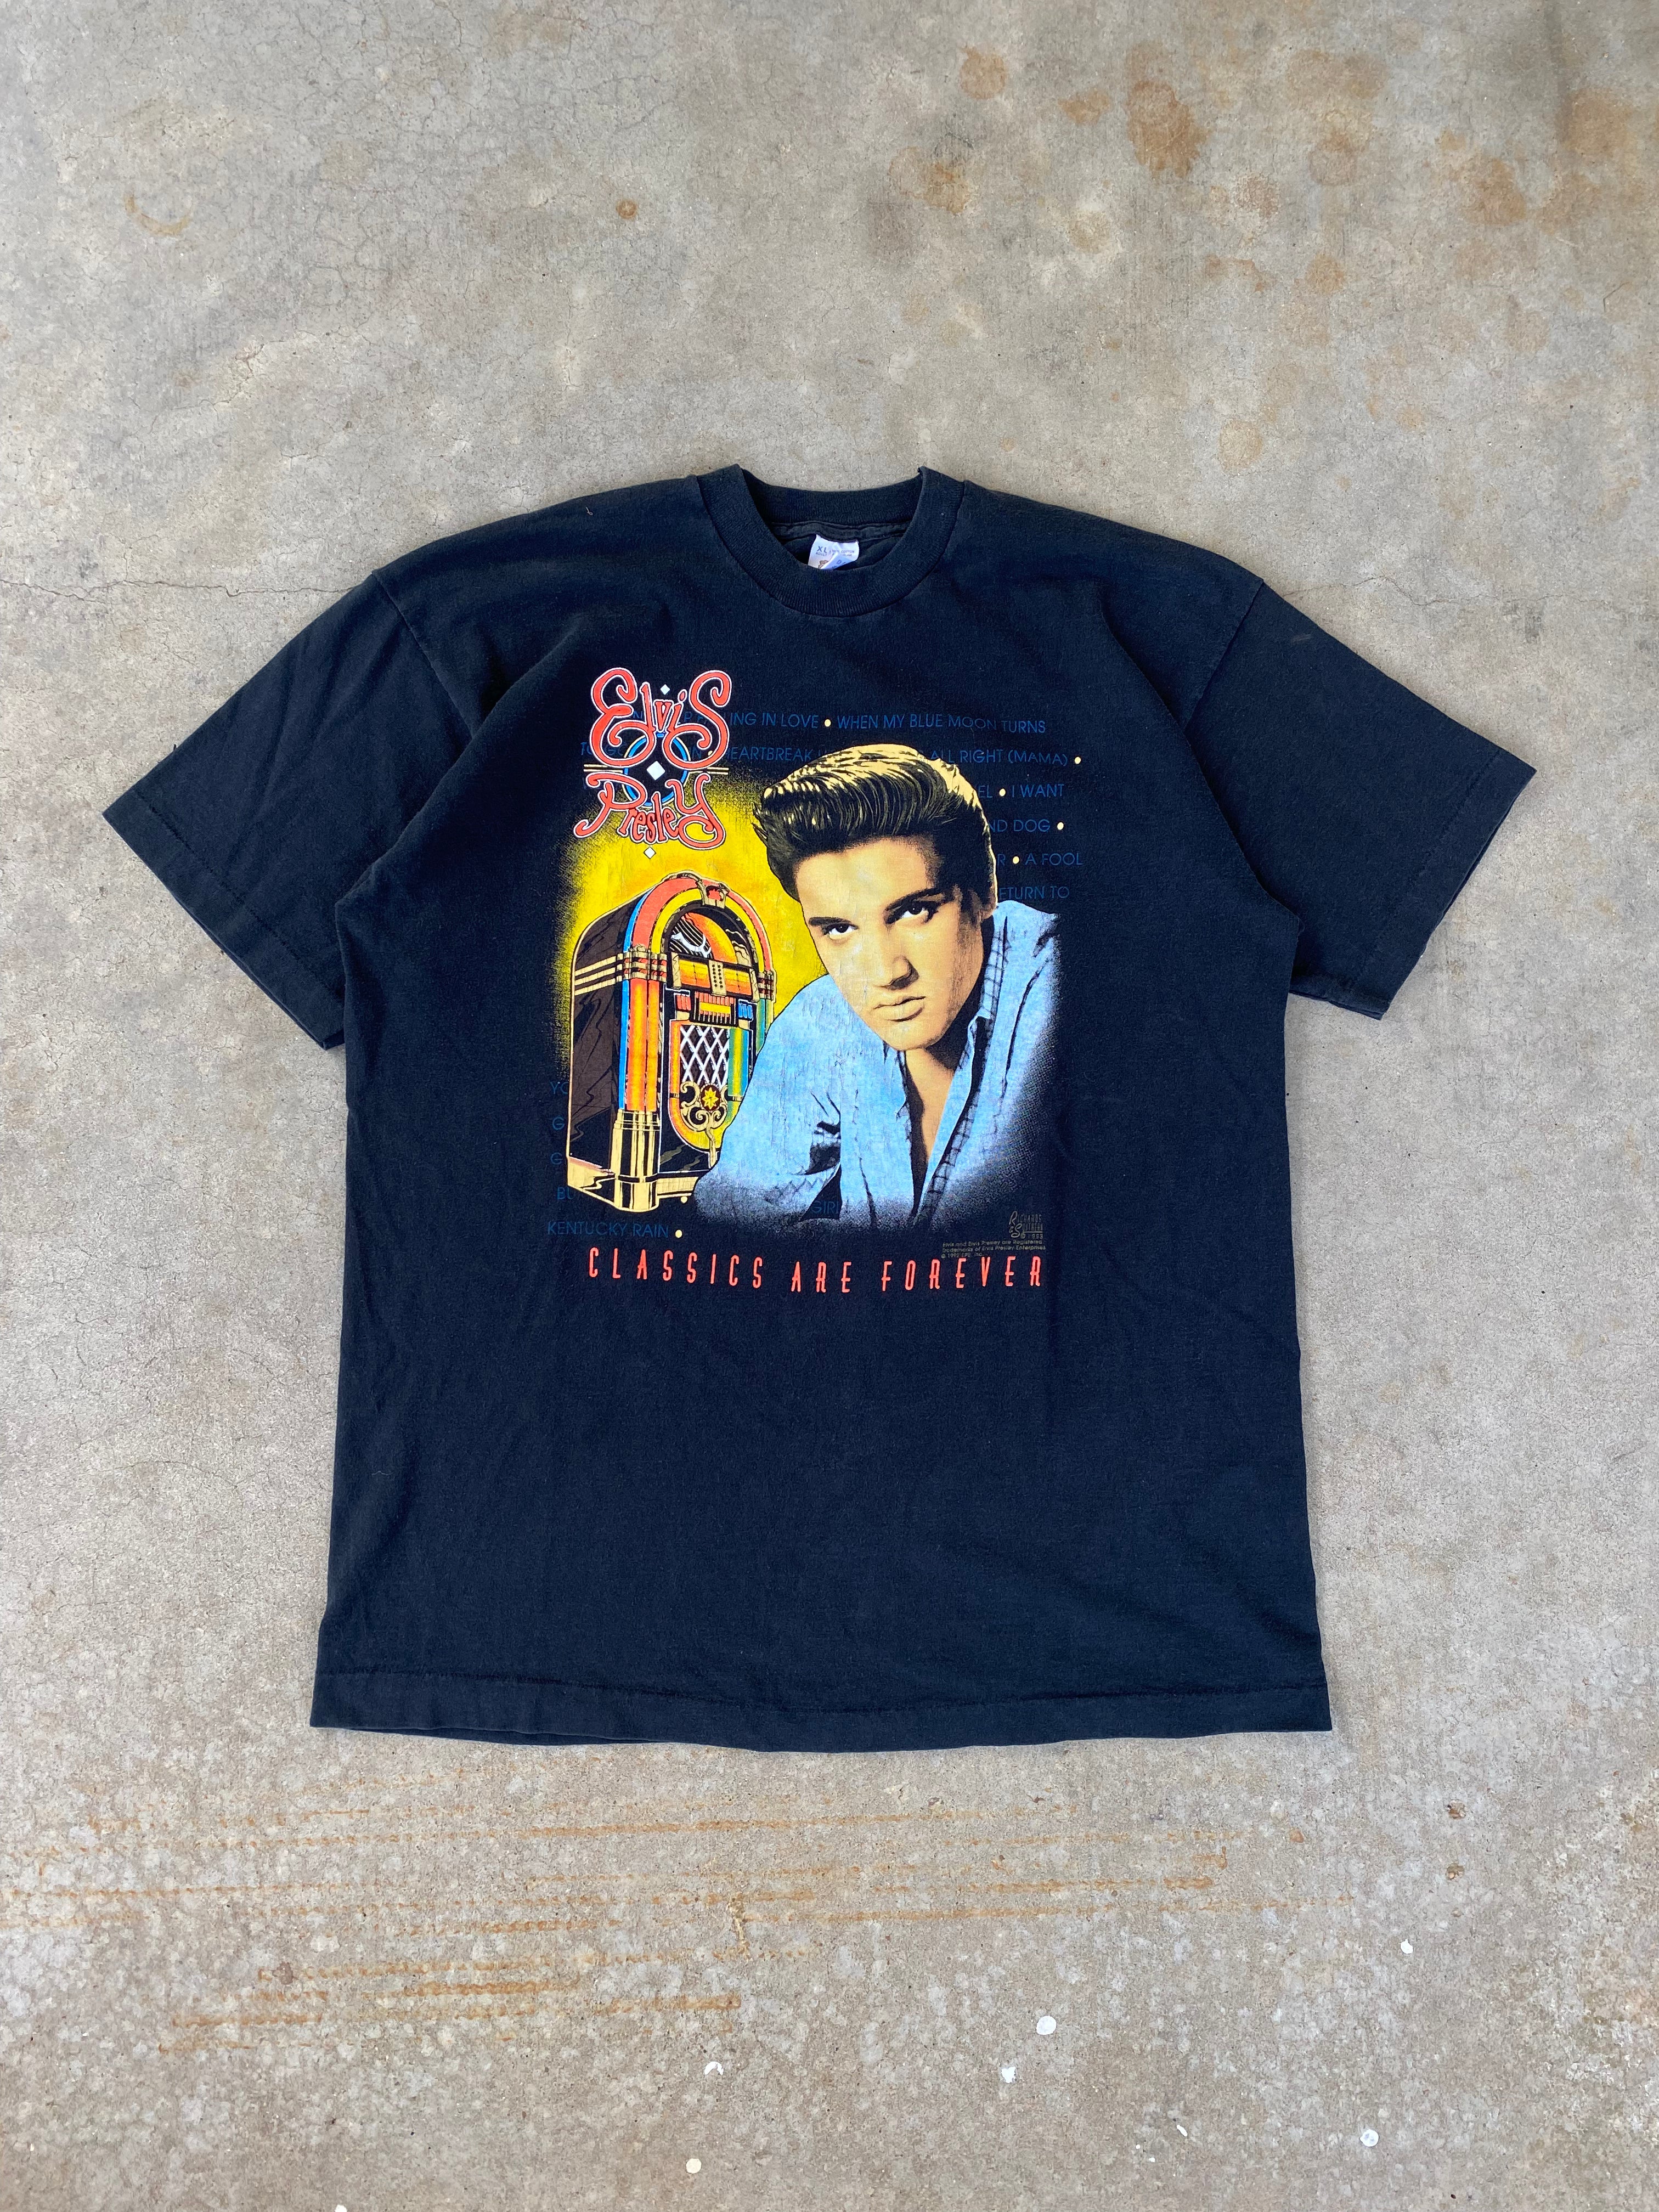 1992 Elvis Presley Classics Are Forever T-Shirt (XL)